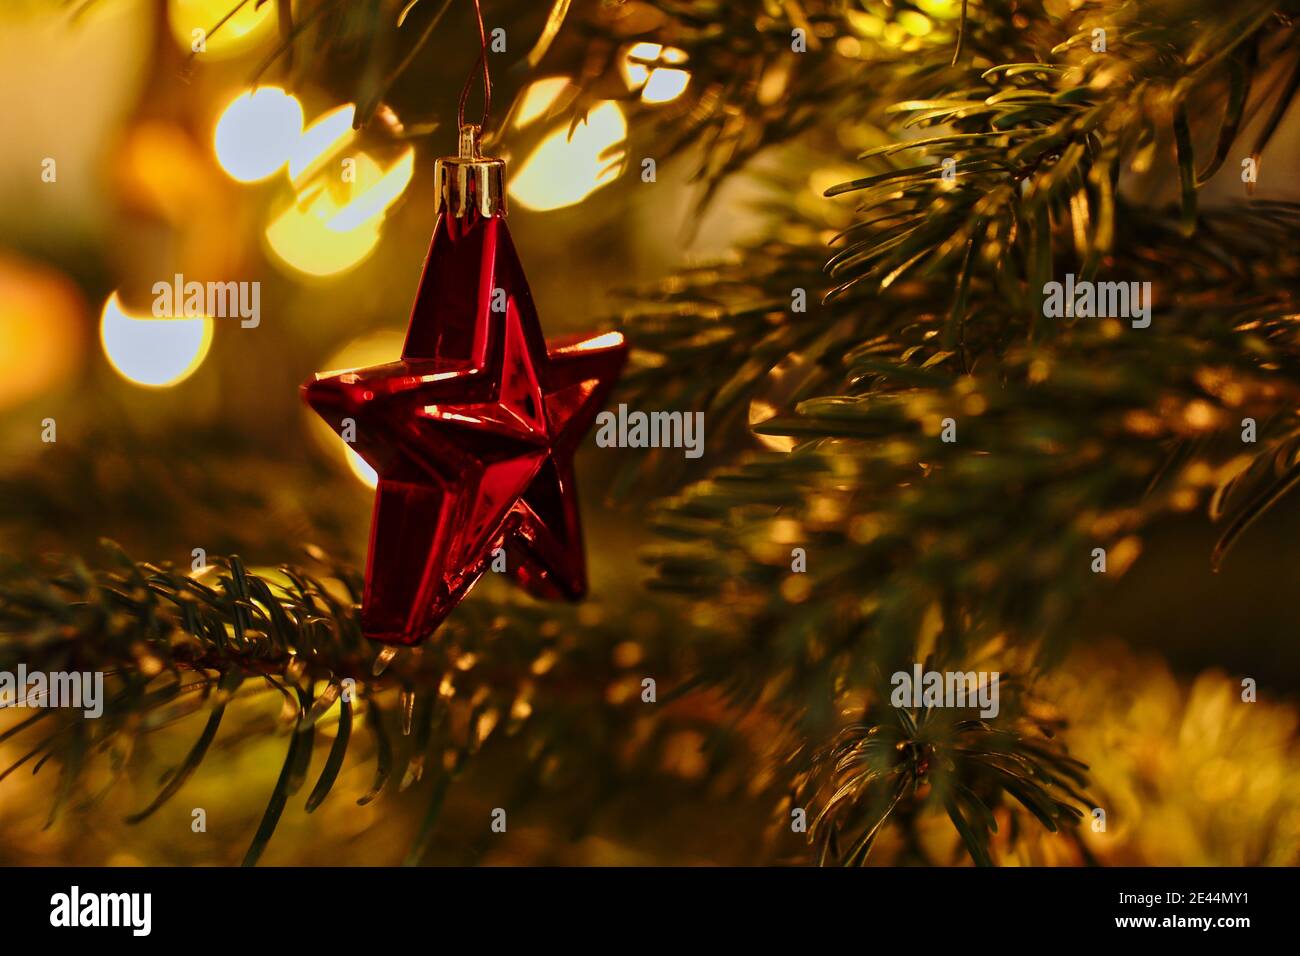 Hanging Red Christmas Star Ornament on Tree Branch during Festive Season. Shiny Star Ornament on the Christmas Tree. Stock Photo